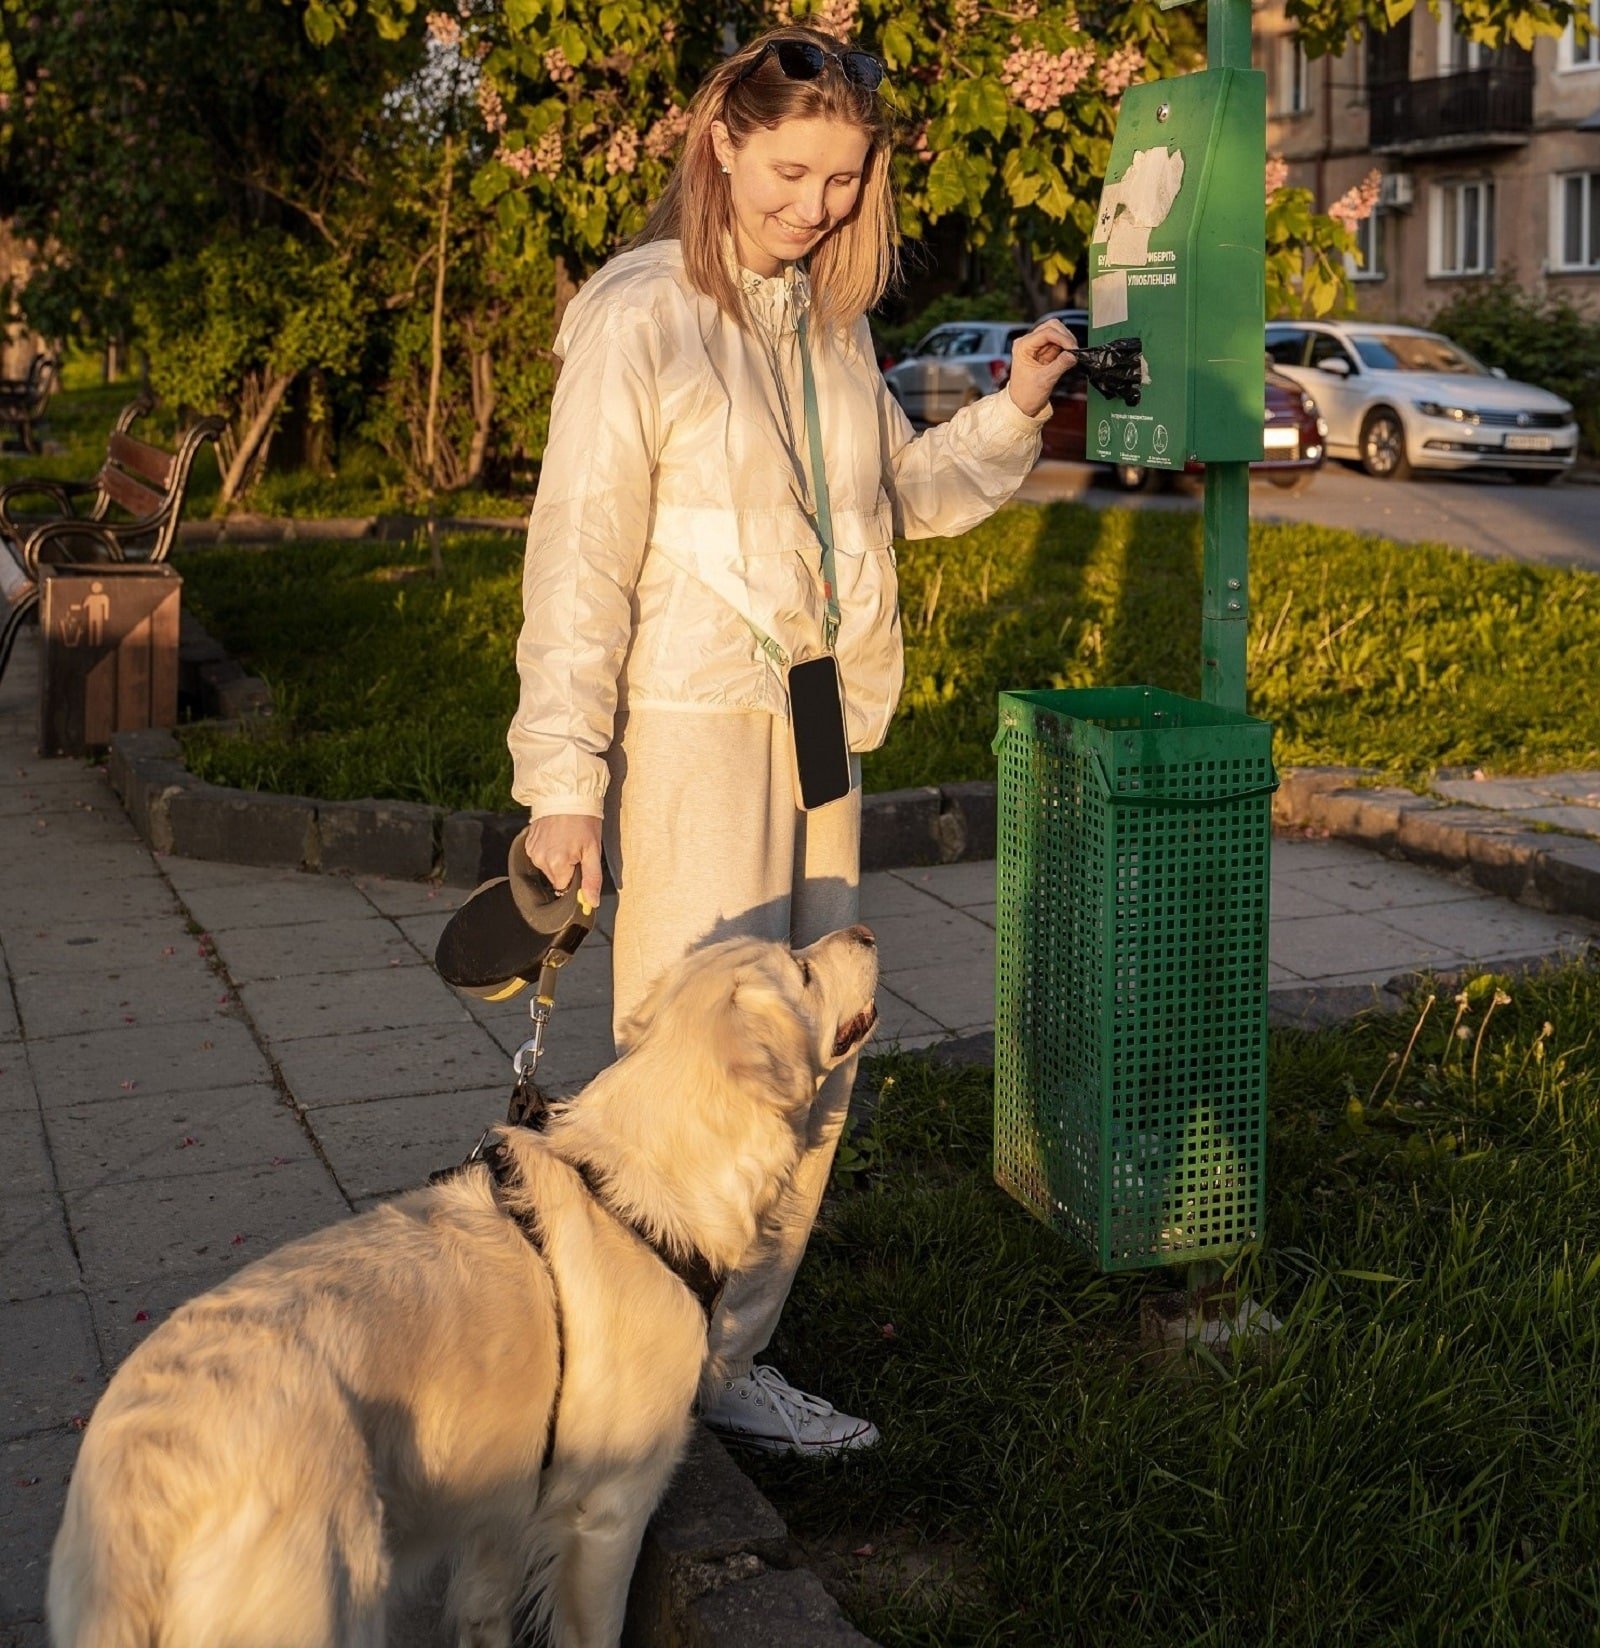 <p><span>When traveling with pets, respecting local etiquette and regulations is important. Keep your pet on a leash in public spaces, clean up after them, and be mindful of noise levels in accommodations. Familiarize yourself with local pet laws to avoid any issues during your stay.</span></p> <p><b>Insider’s Tip: </b><span>Observe how locals interact with their pets and follow their lead regarding pet etiquette in public spaces.</span></p>